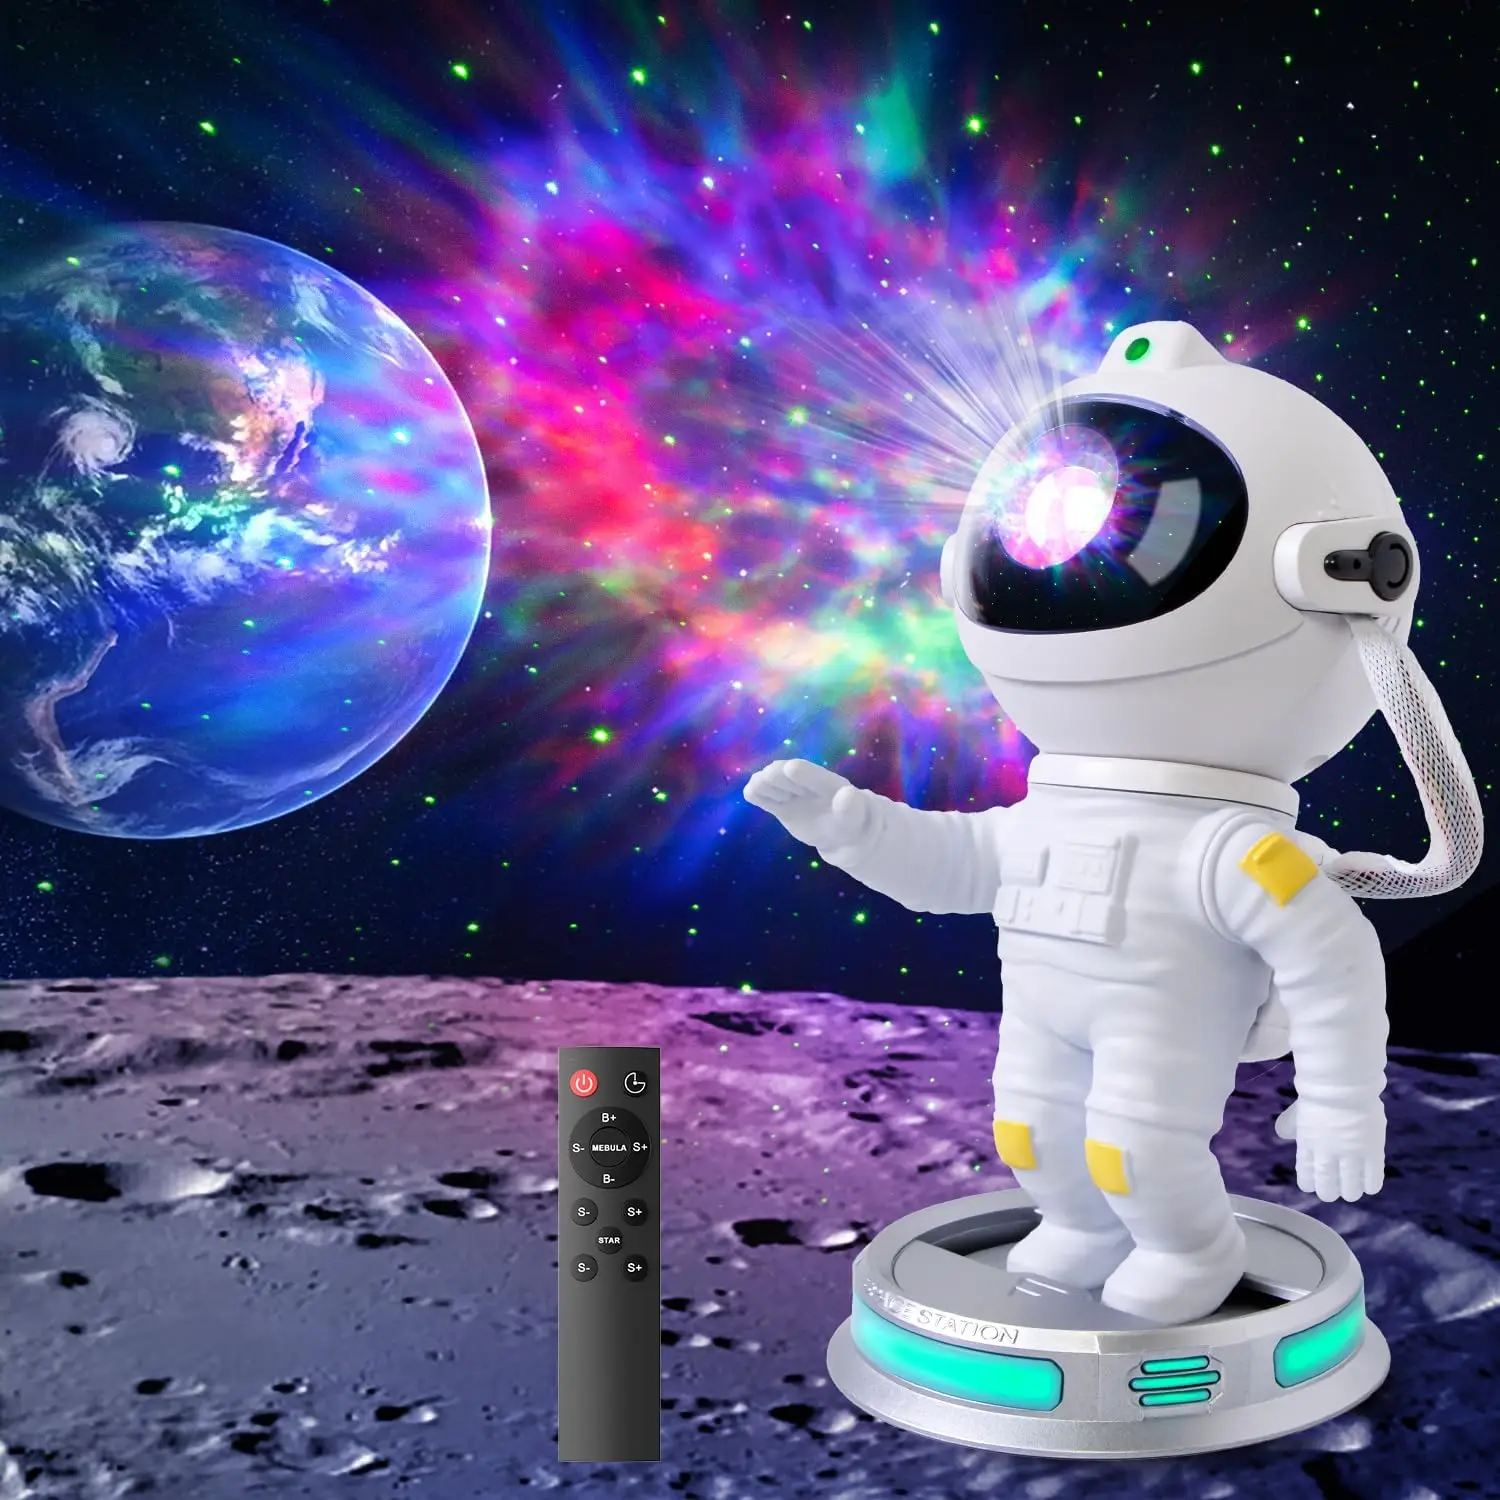 

LED Galaxy Star Projector Starry Sky Night Light Astronaut Lamp Home Room Decor Decoration Bedroom Decorative Luminaires Gift